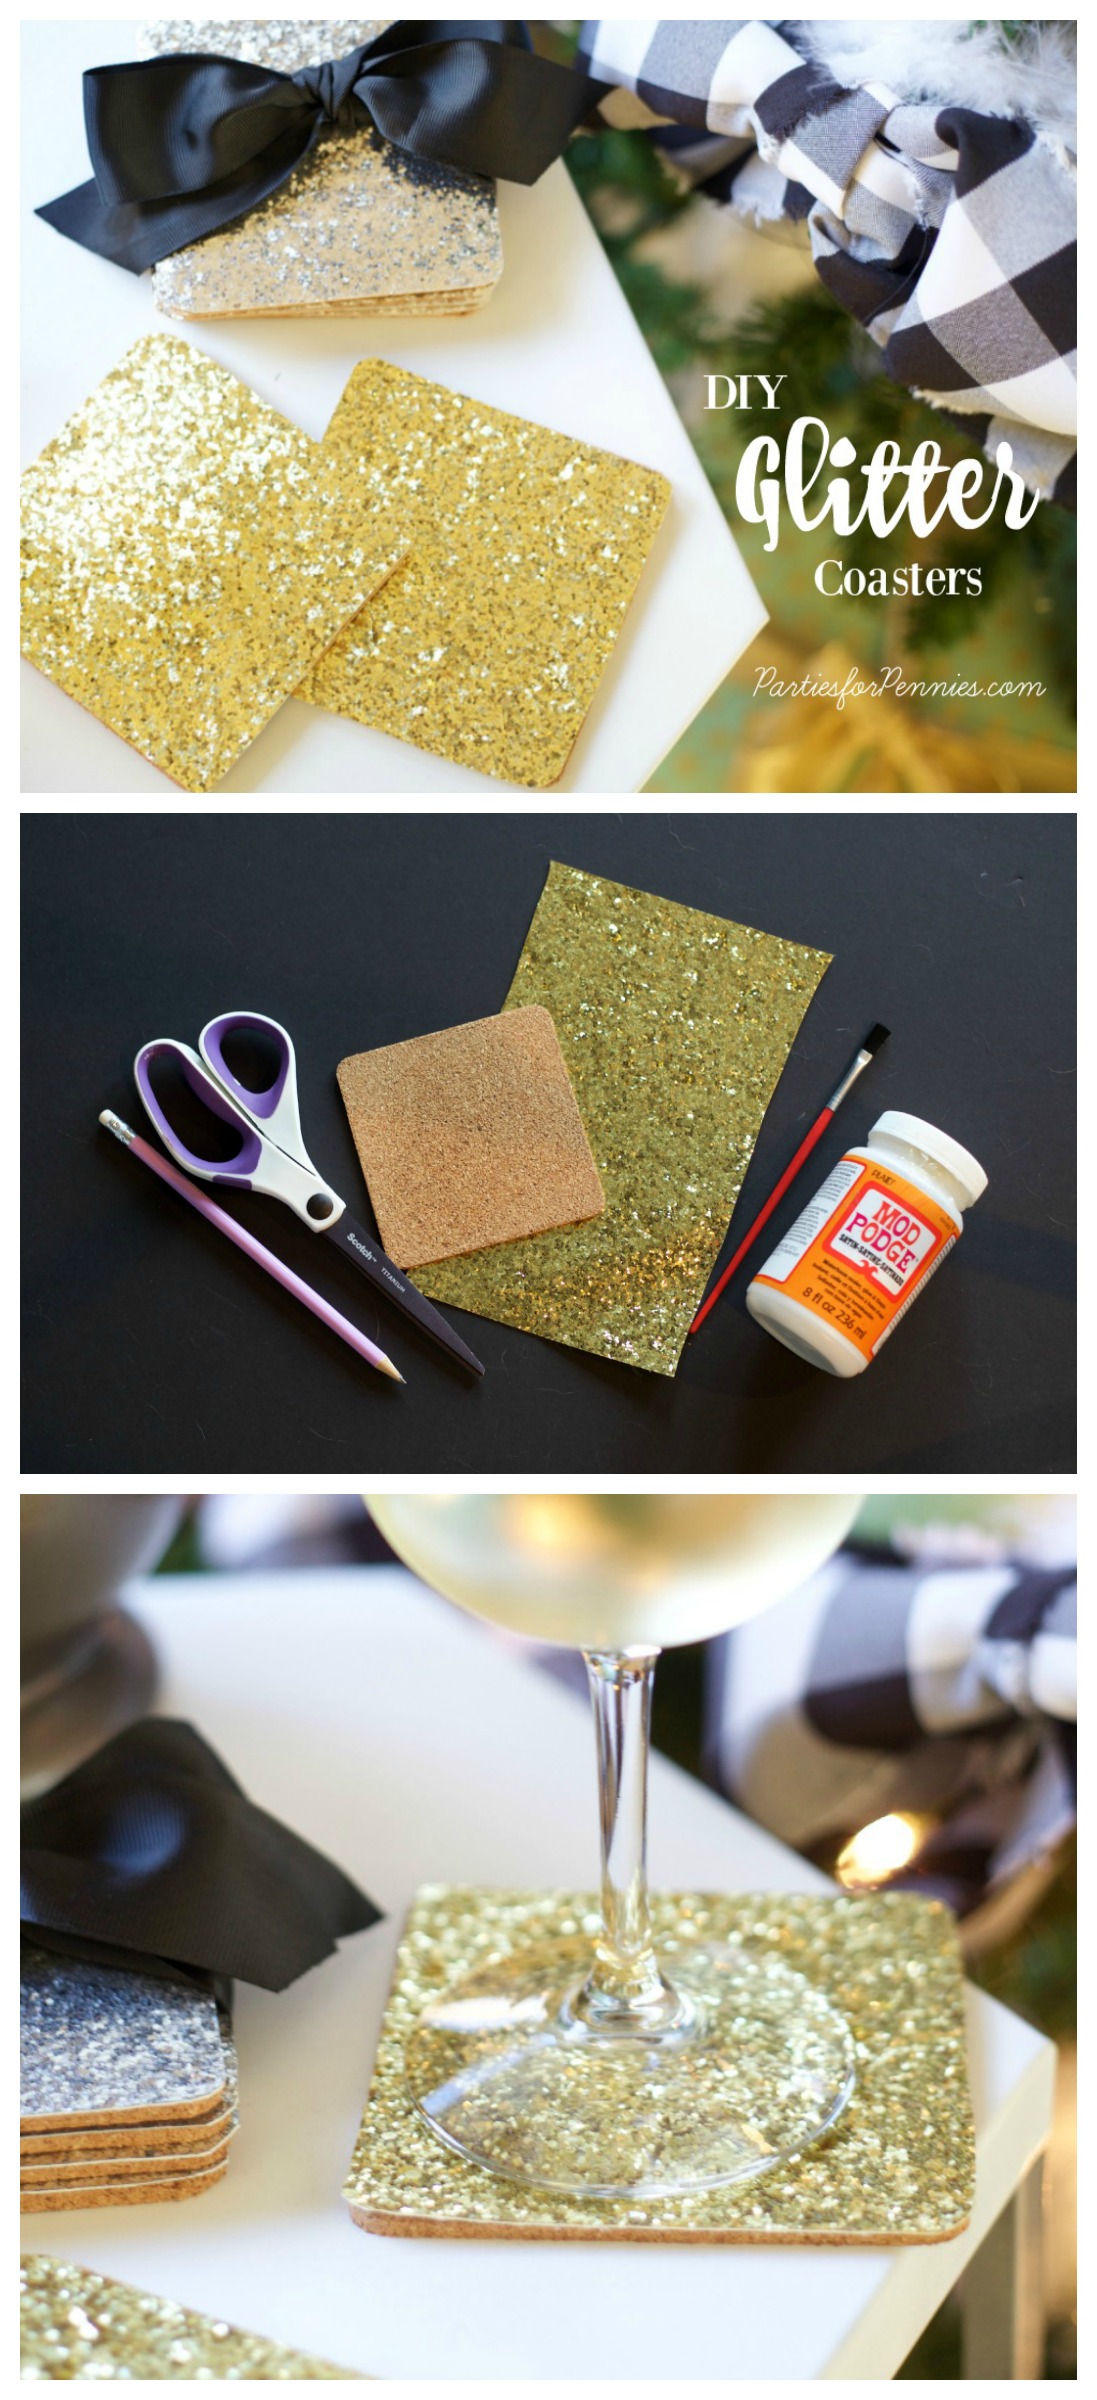 DIY Glitter Coasters by PartiesforPennies.com | Homemade Gift | DIY Gift | Hostess Gift | Gift for Entertainer